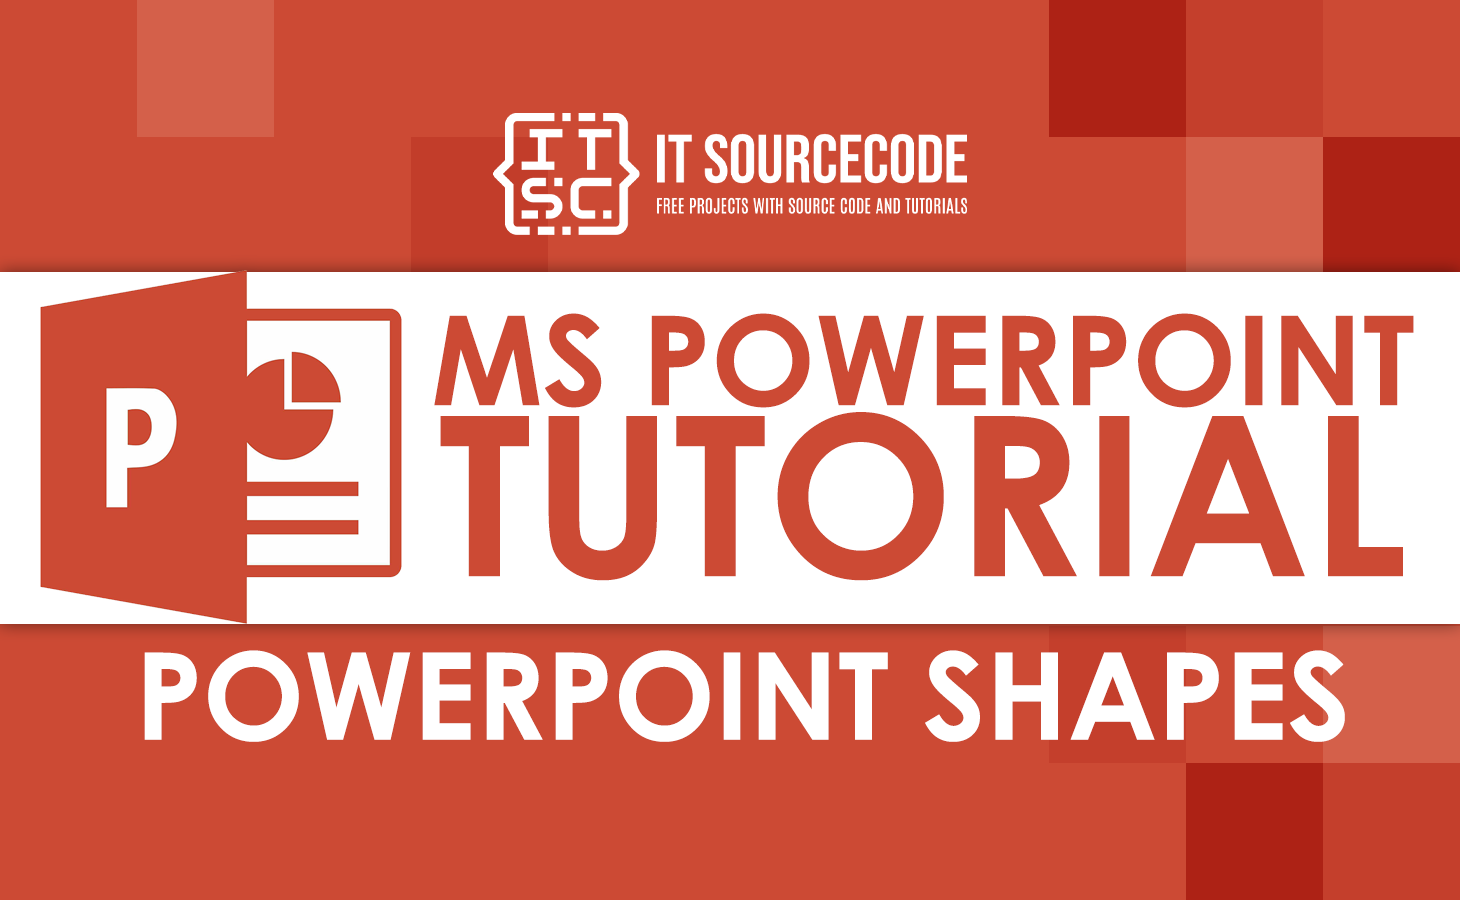 MS Powerpoint Tutorial for Shapes